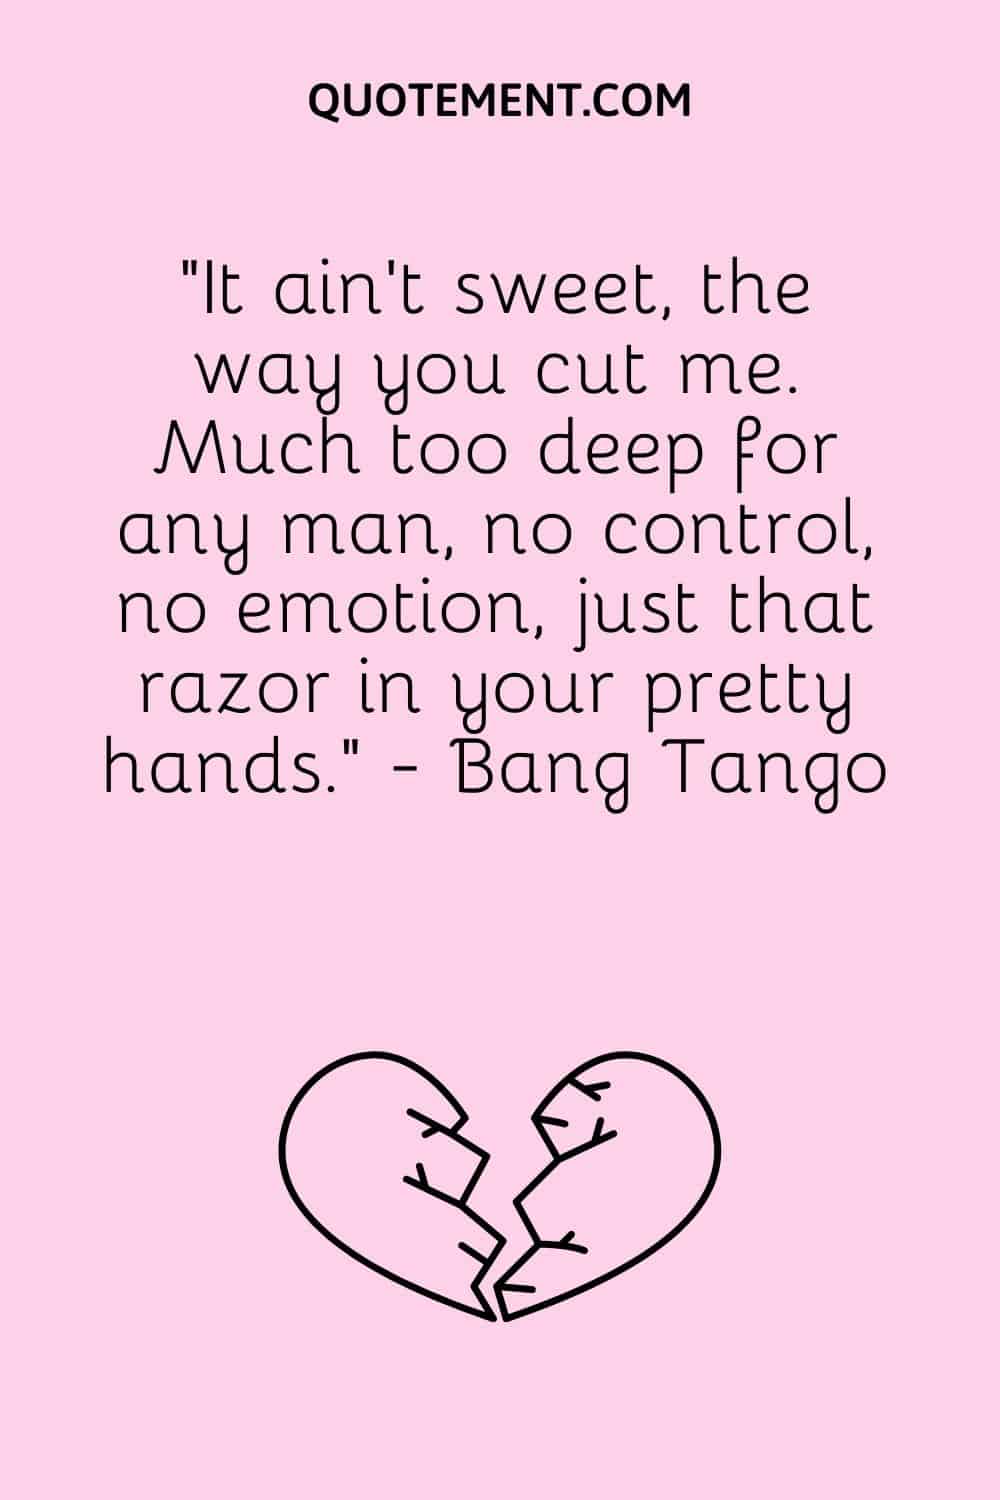 “It ain't sweet, the way you cut me. Much too deep for any man, no control, no emotion, just that razor in your pretty hands.” - Bang Tango